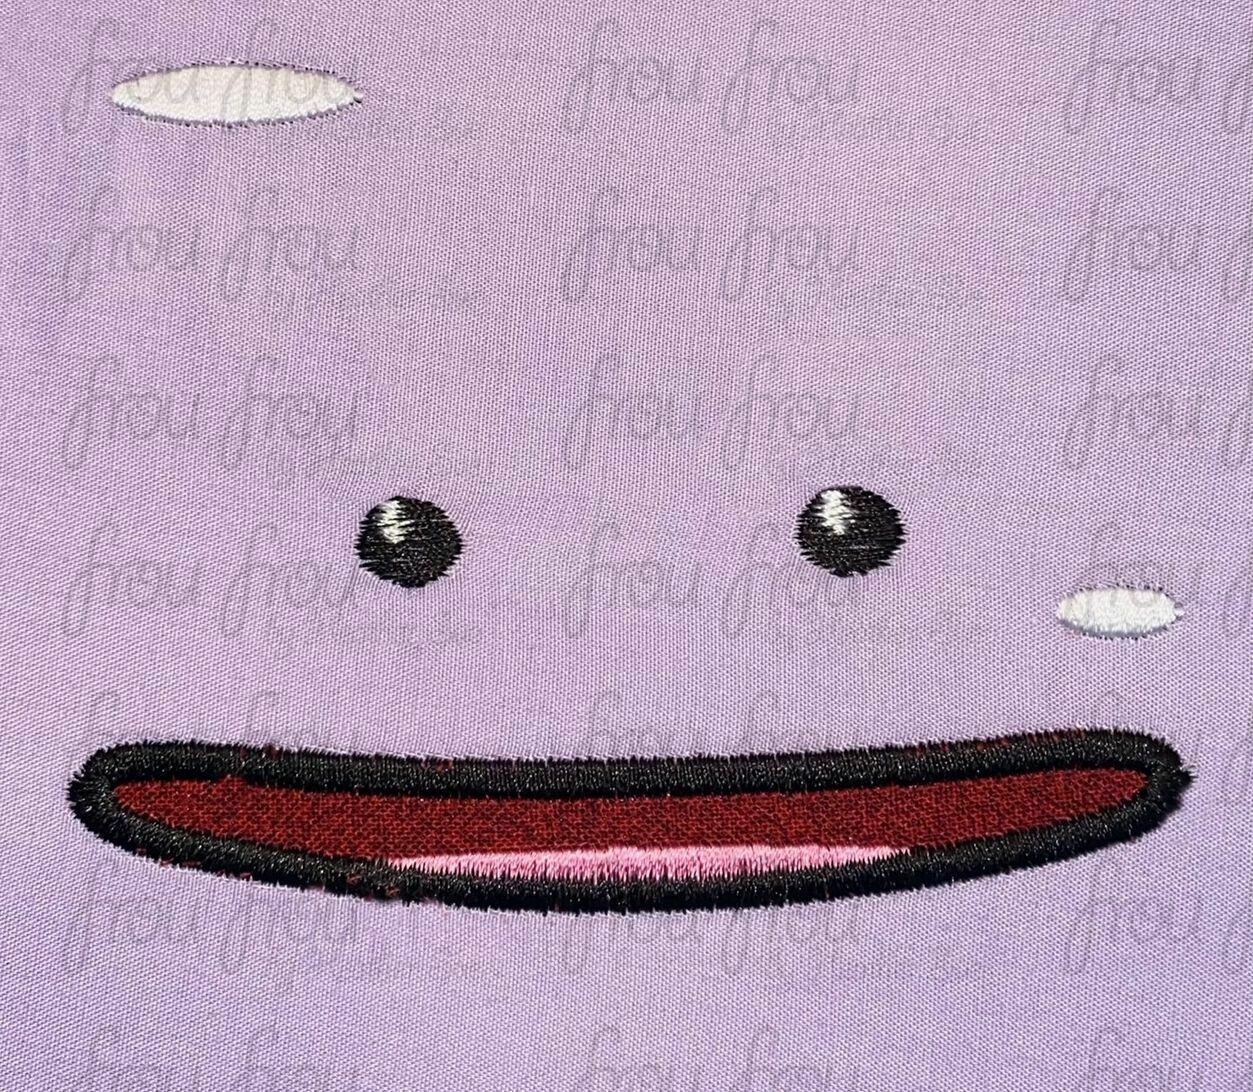 Diddo Poke Man Just Face Machine Applique and filled Embroidery Design 2"-16"